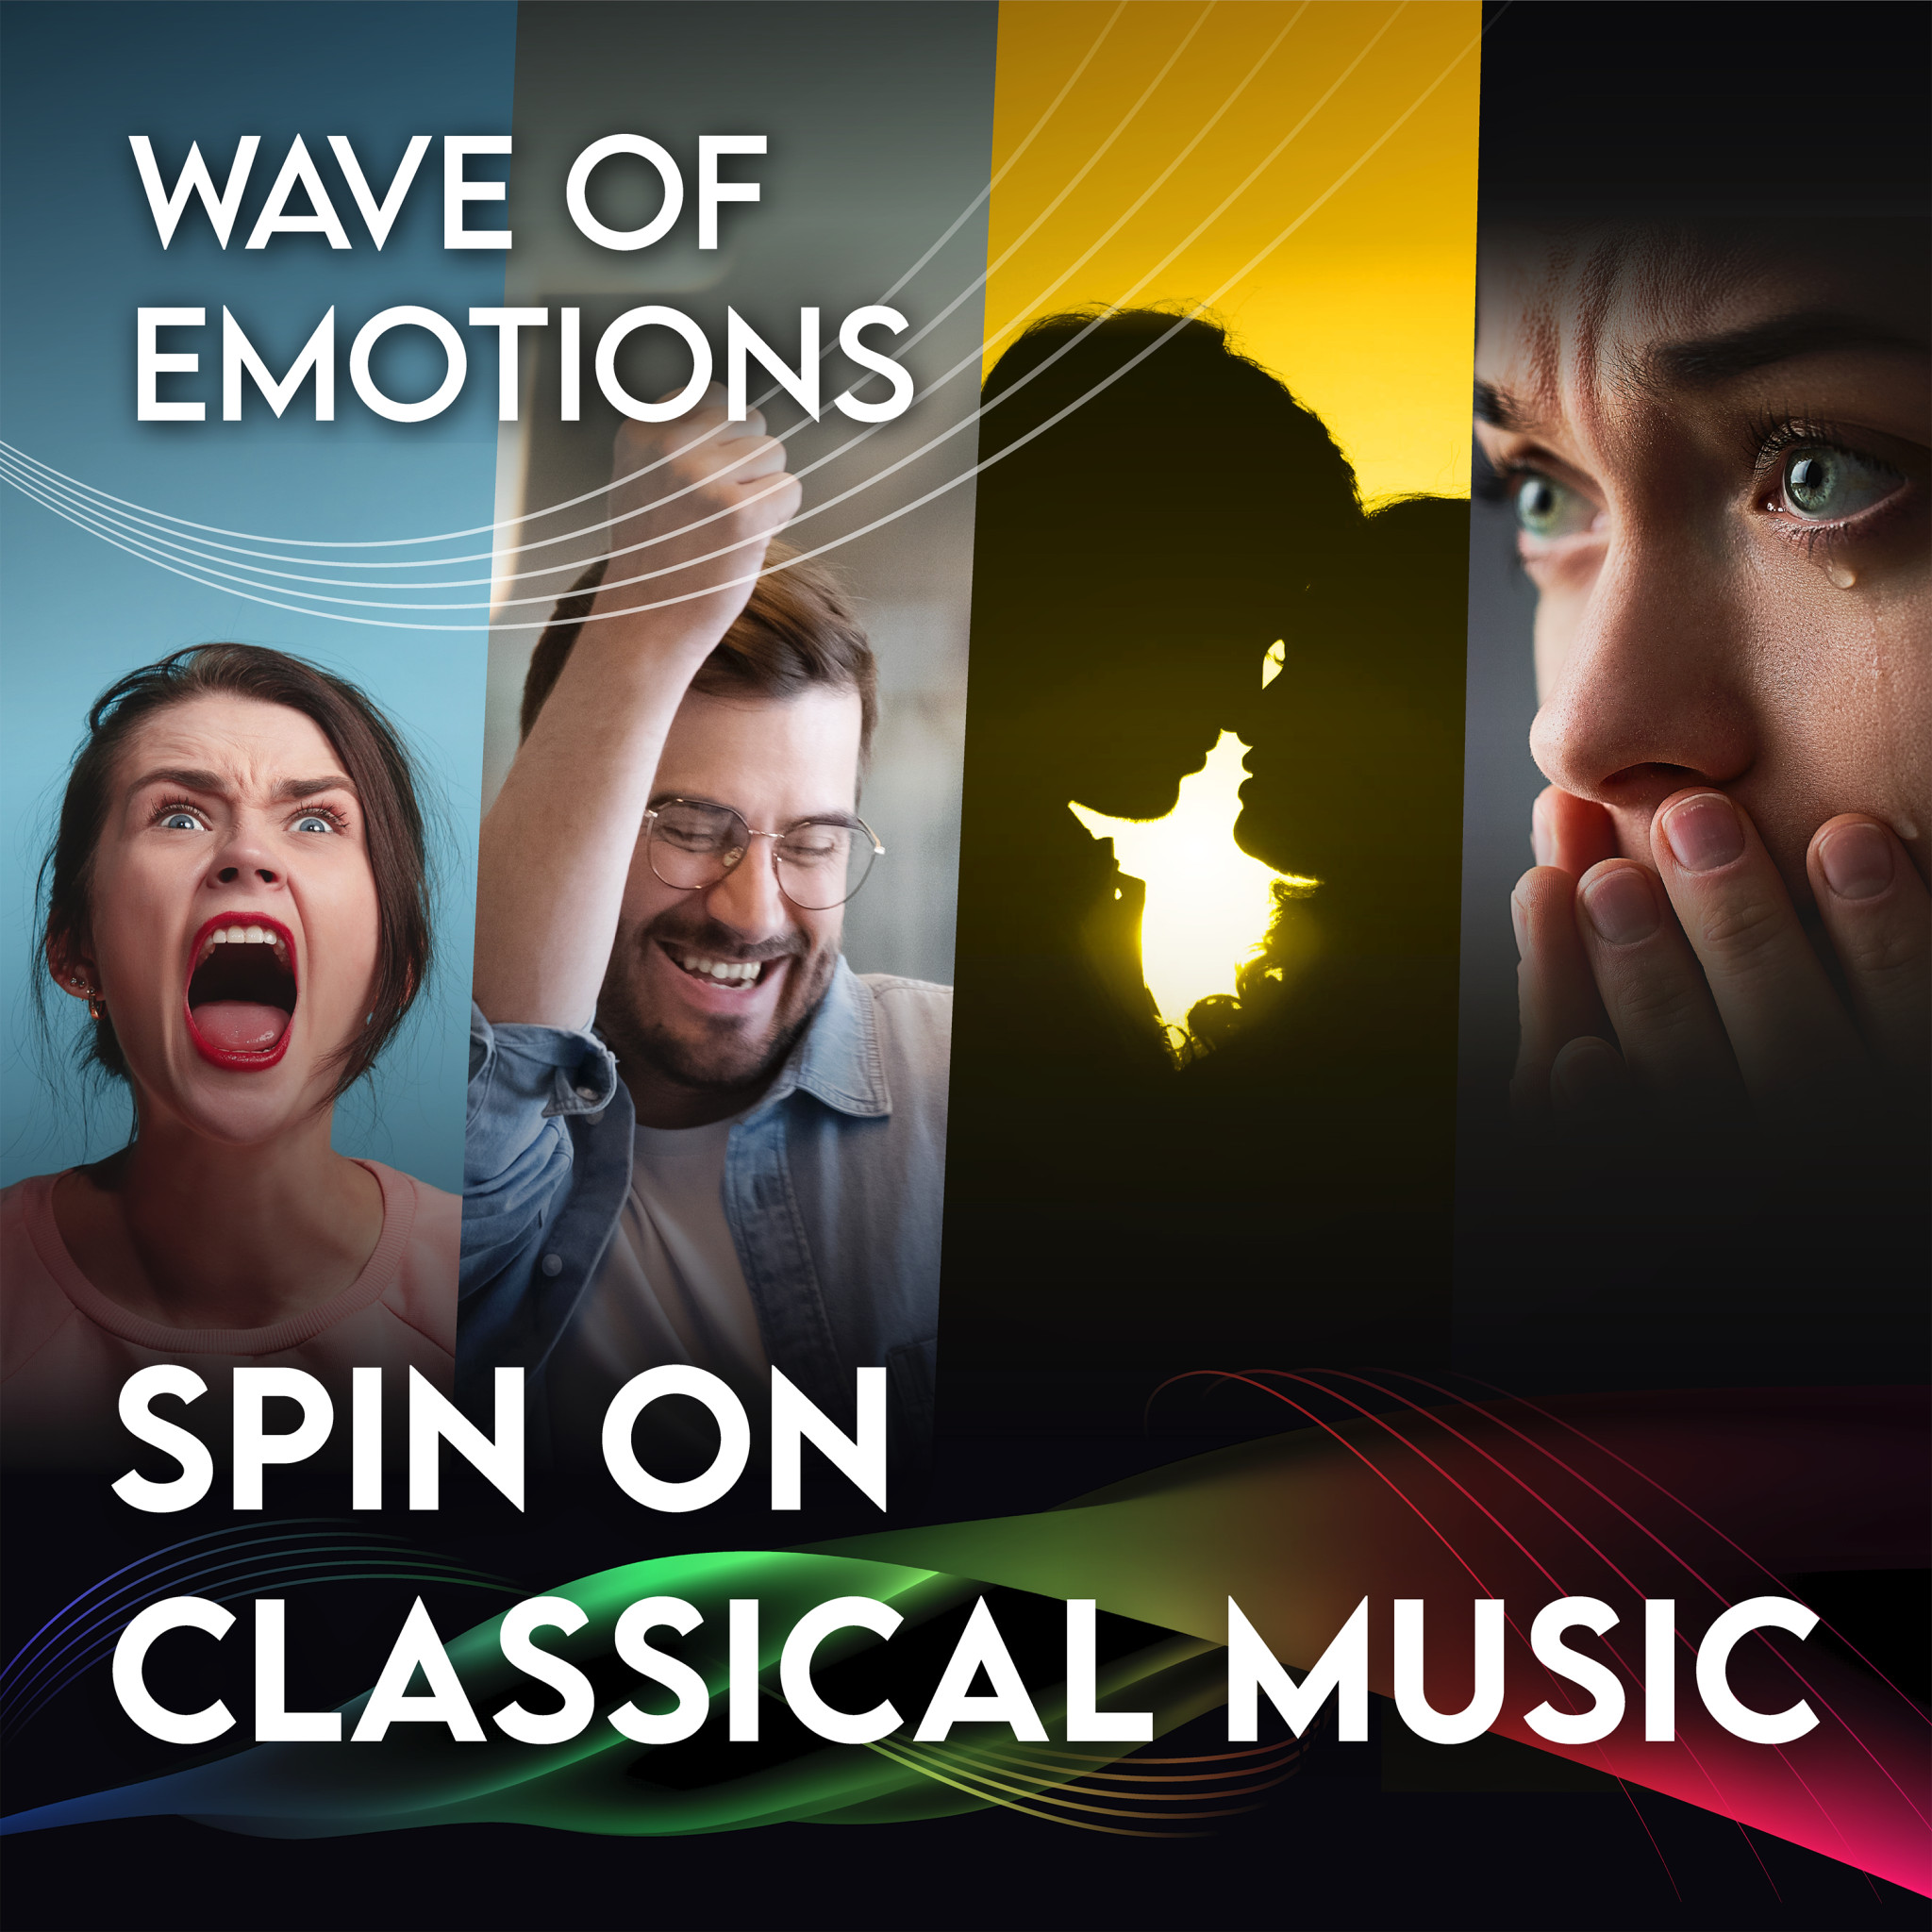 Karajan - Spin on Classical Music Waves of Emotion Cover